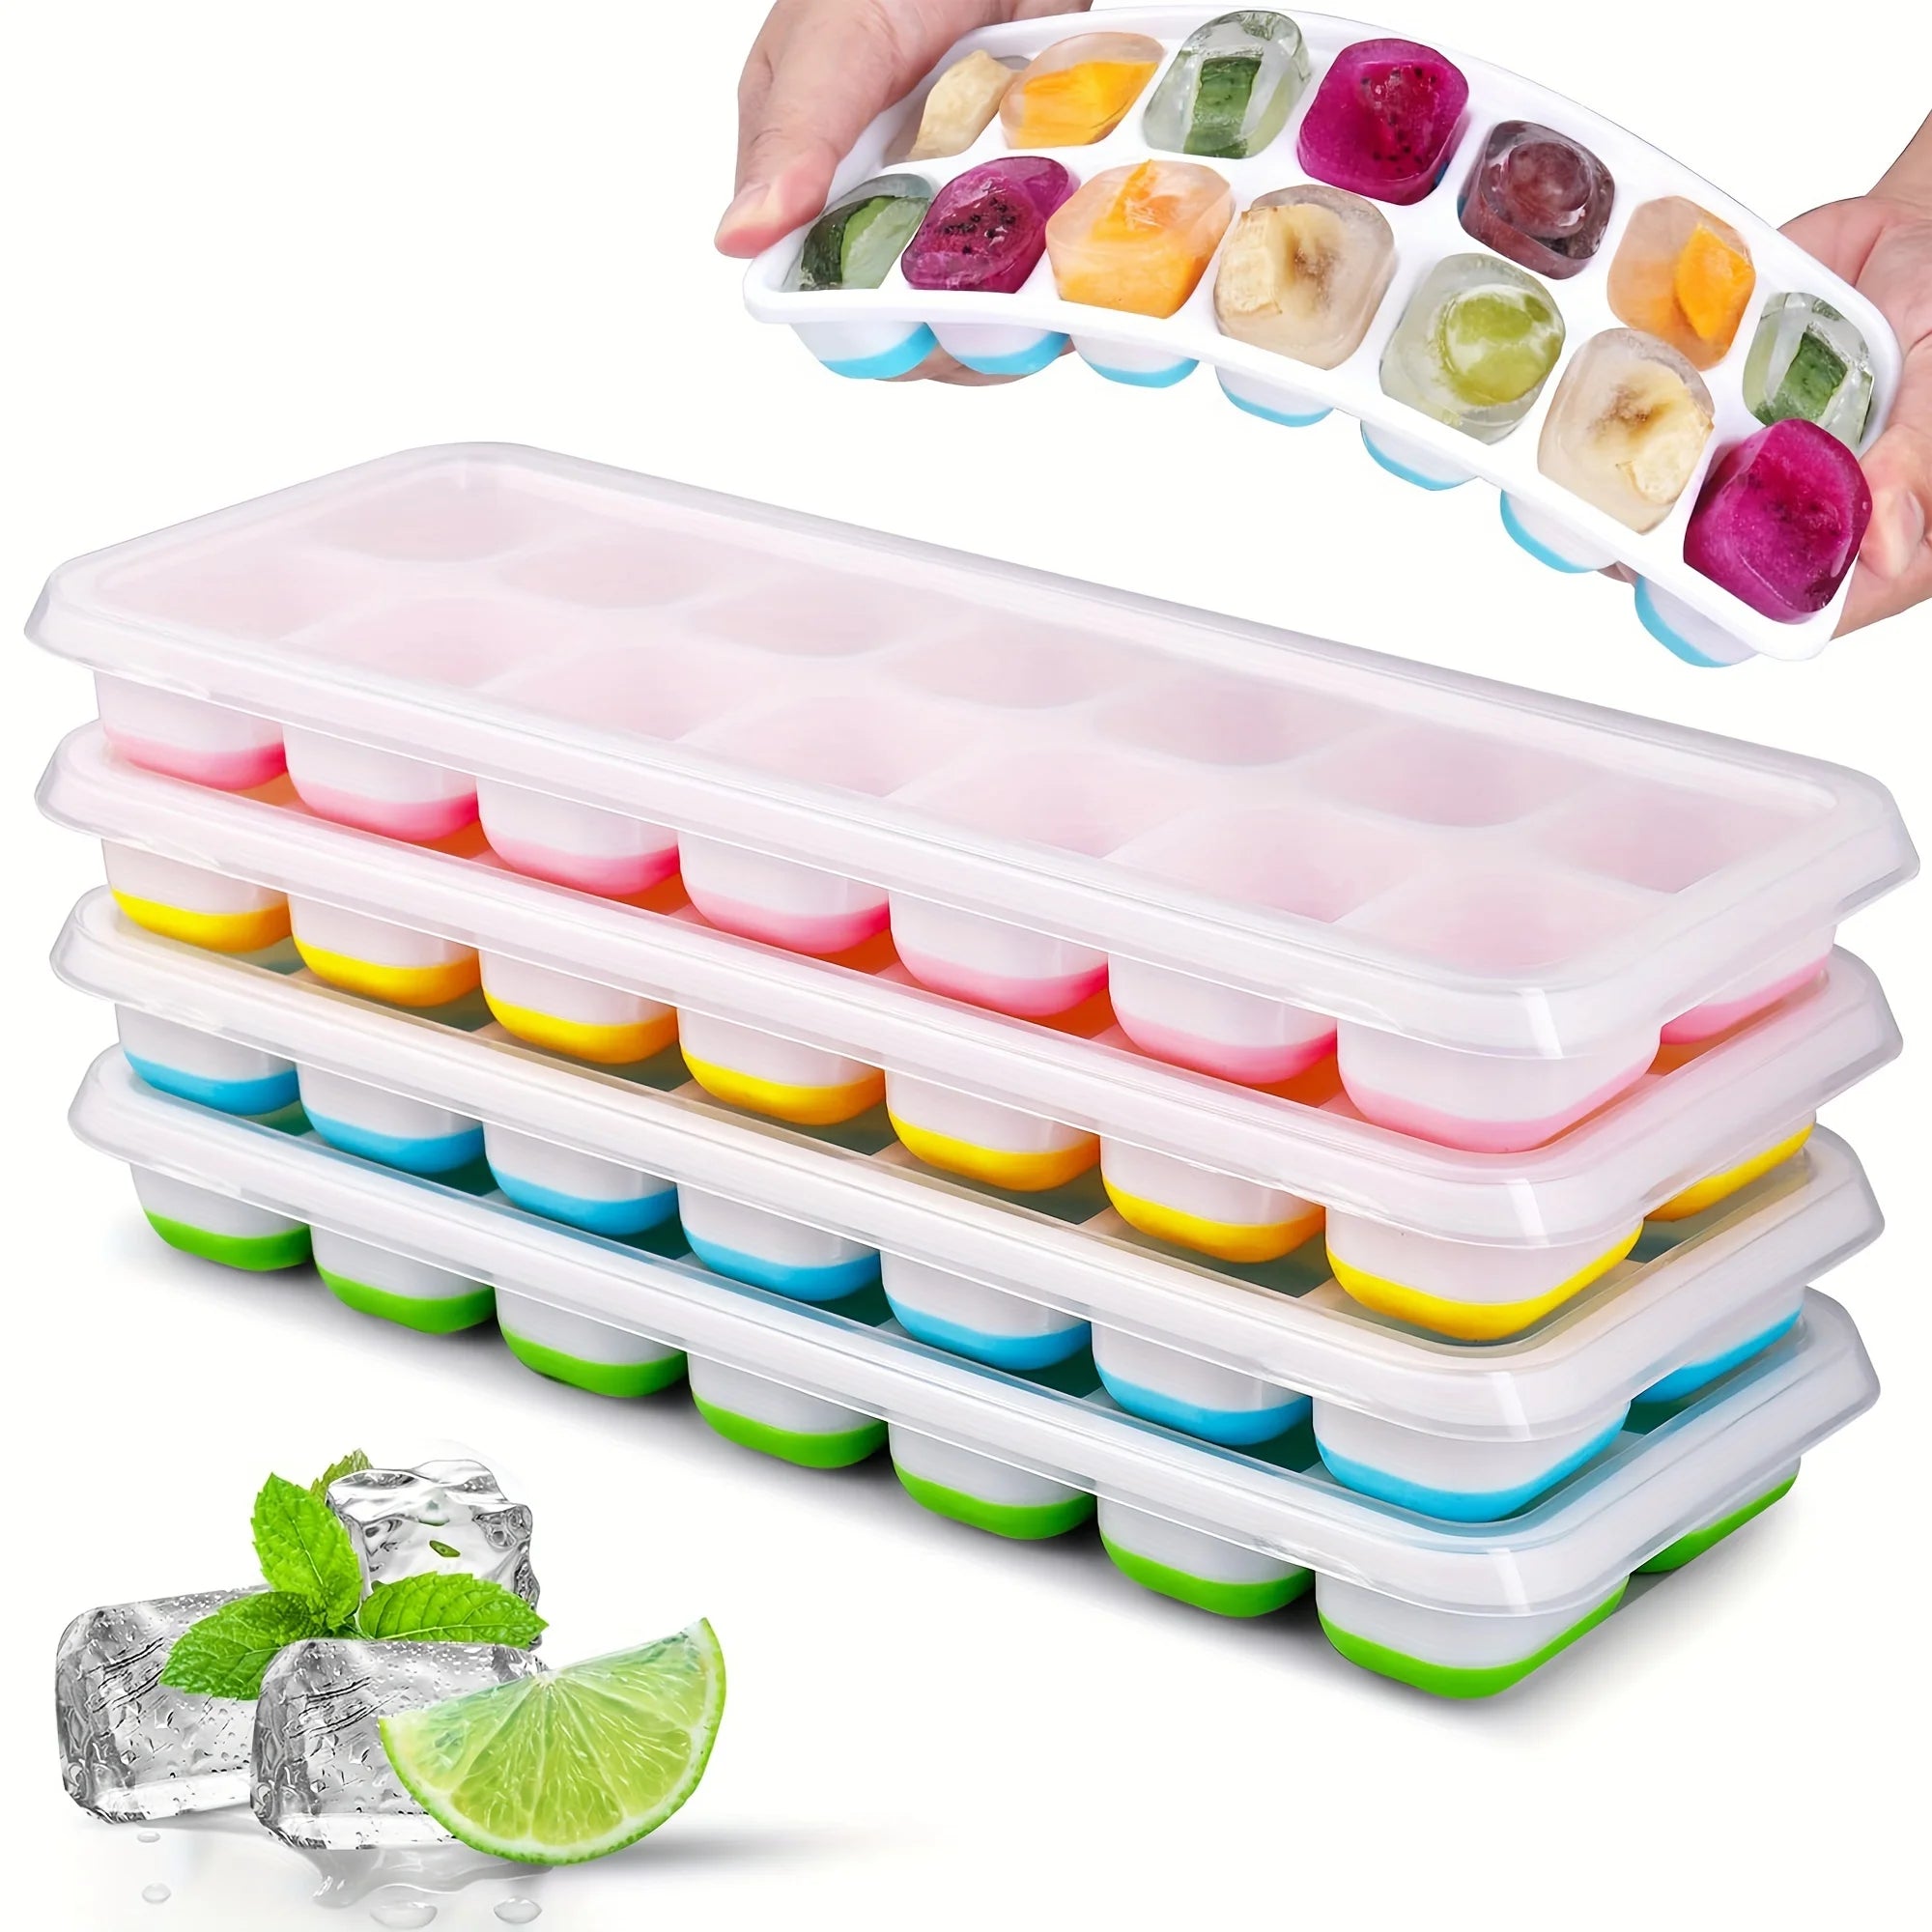 Easy-Release Silicone Ice Cube Mold with Spill-Resistant Lid